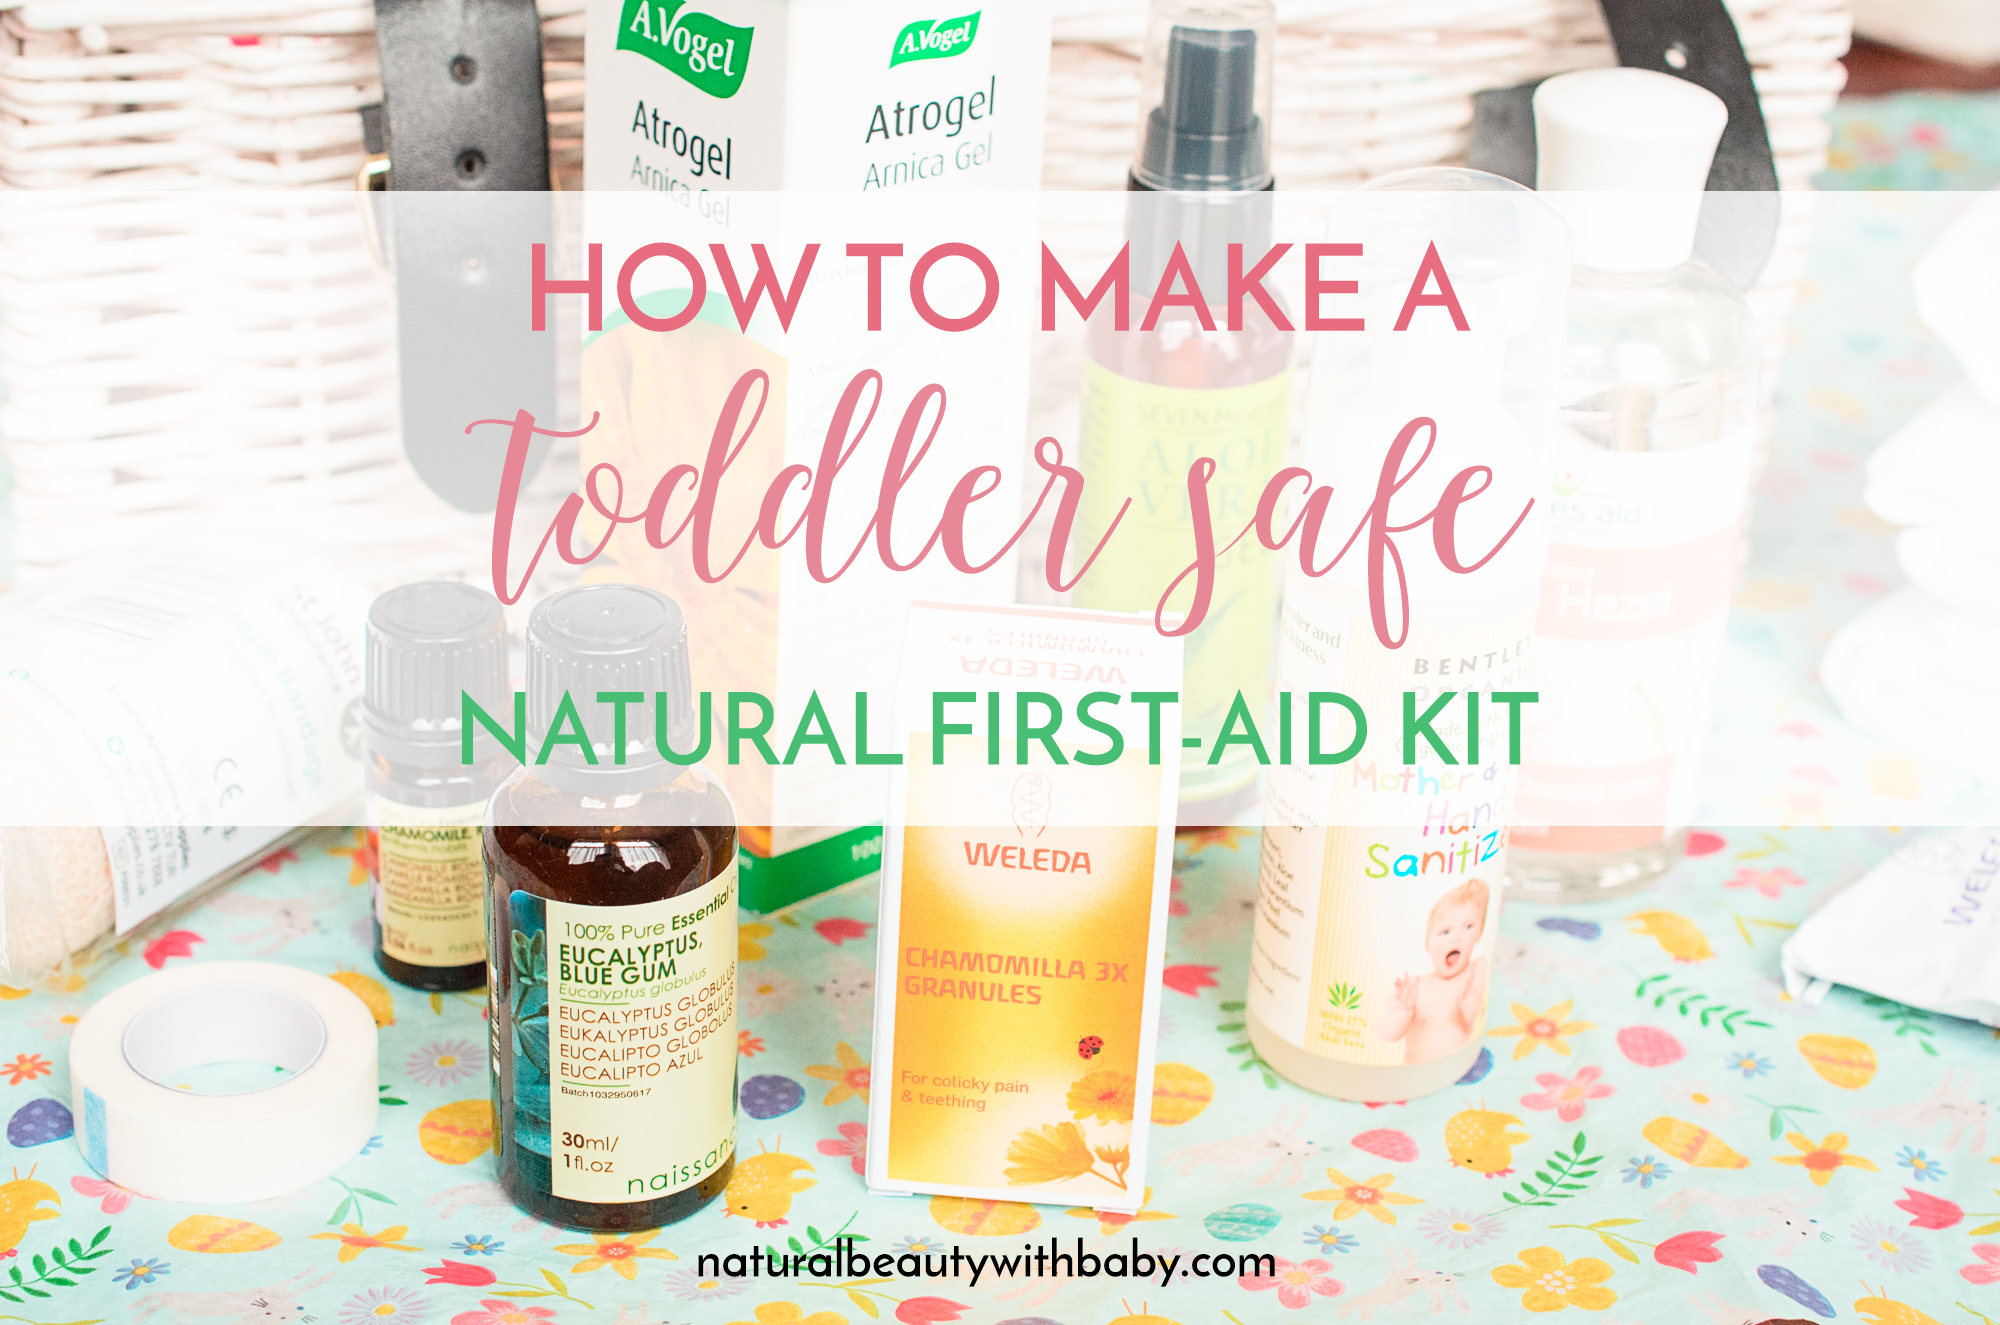 How to make your own natural first aid and remedy kit to treat toddler mishaps and everyday aliments. Includes printable checklist.